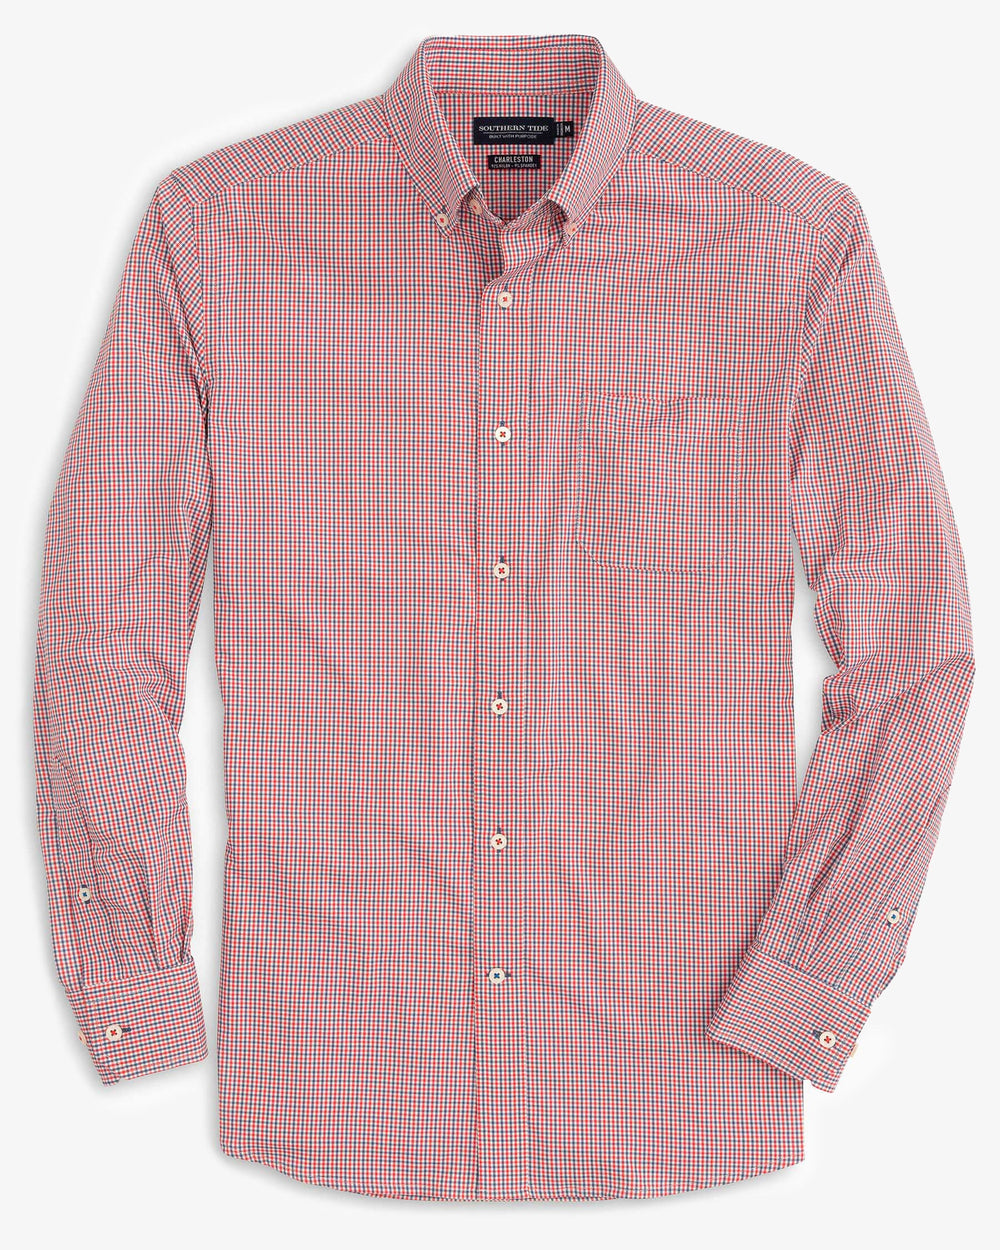 The front of the Men's Bowry Brrr Intercoastal Sport Shirt by Southern Tide - Channel Marker Red